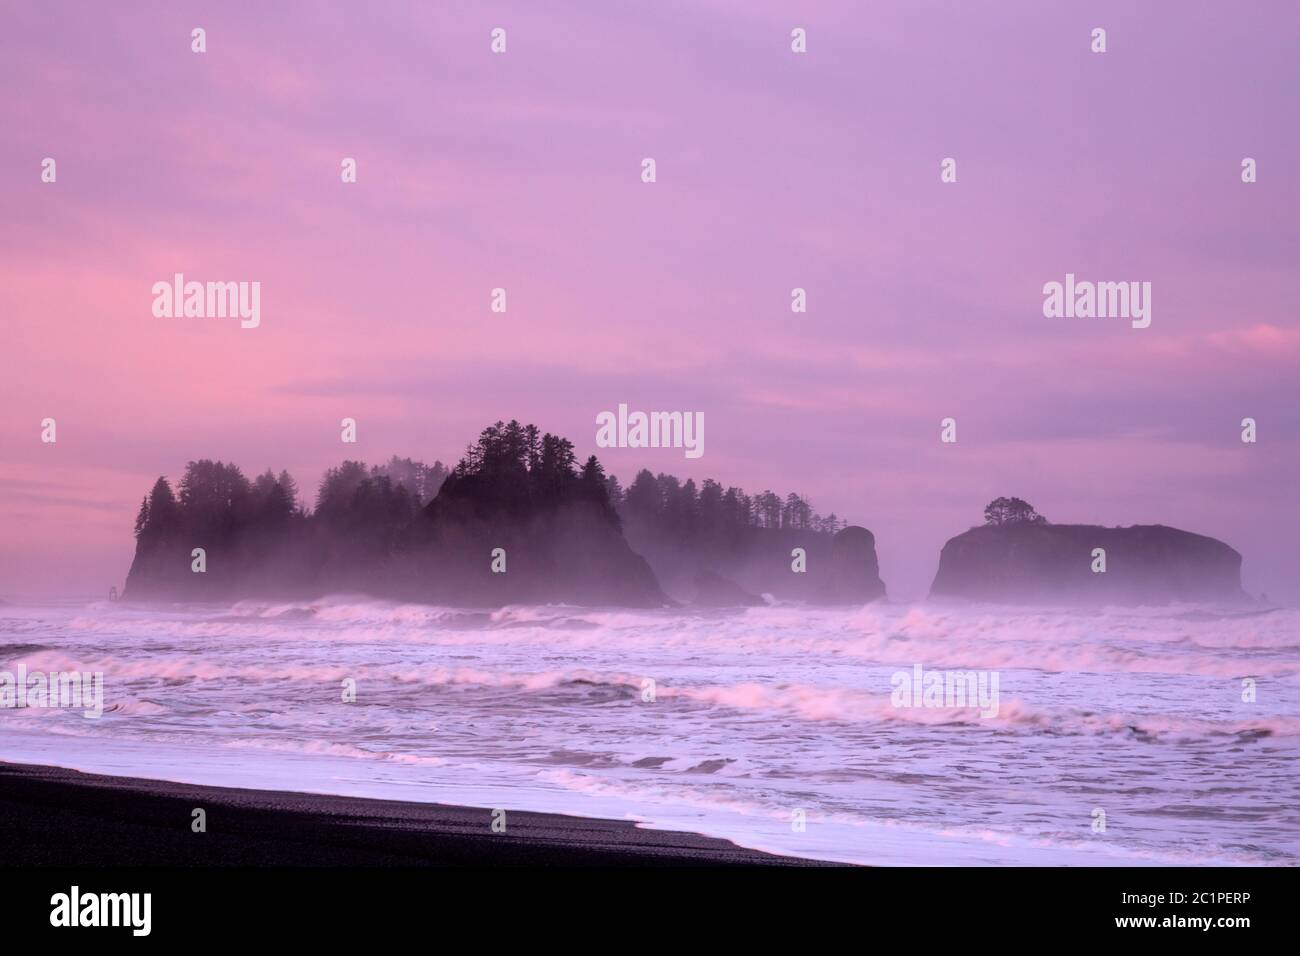 WA16841-00...WASHINGTON - Fog around James Island at sunrise on a stormy day at Rialto Beach in Olympic National Park. Stock Photo